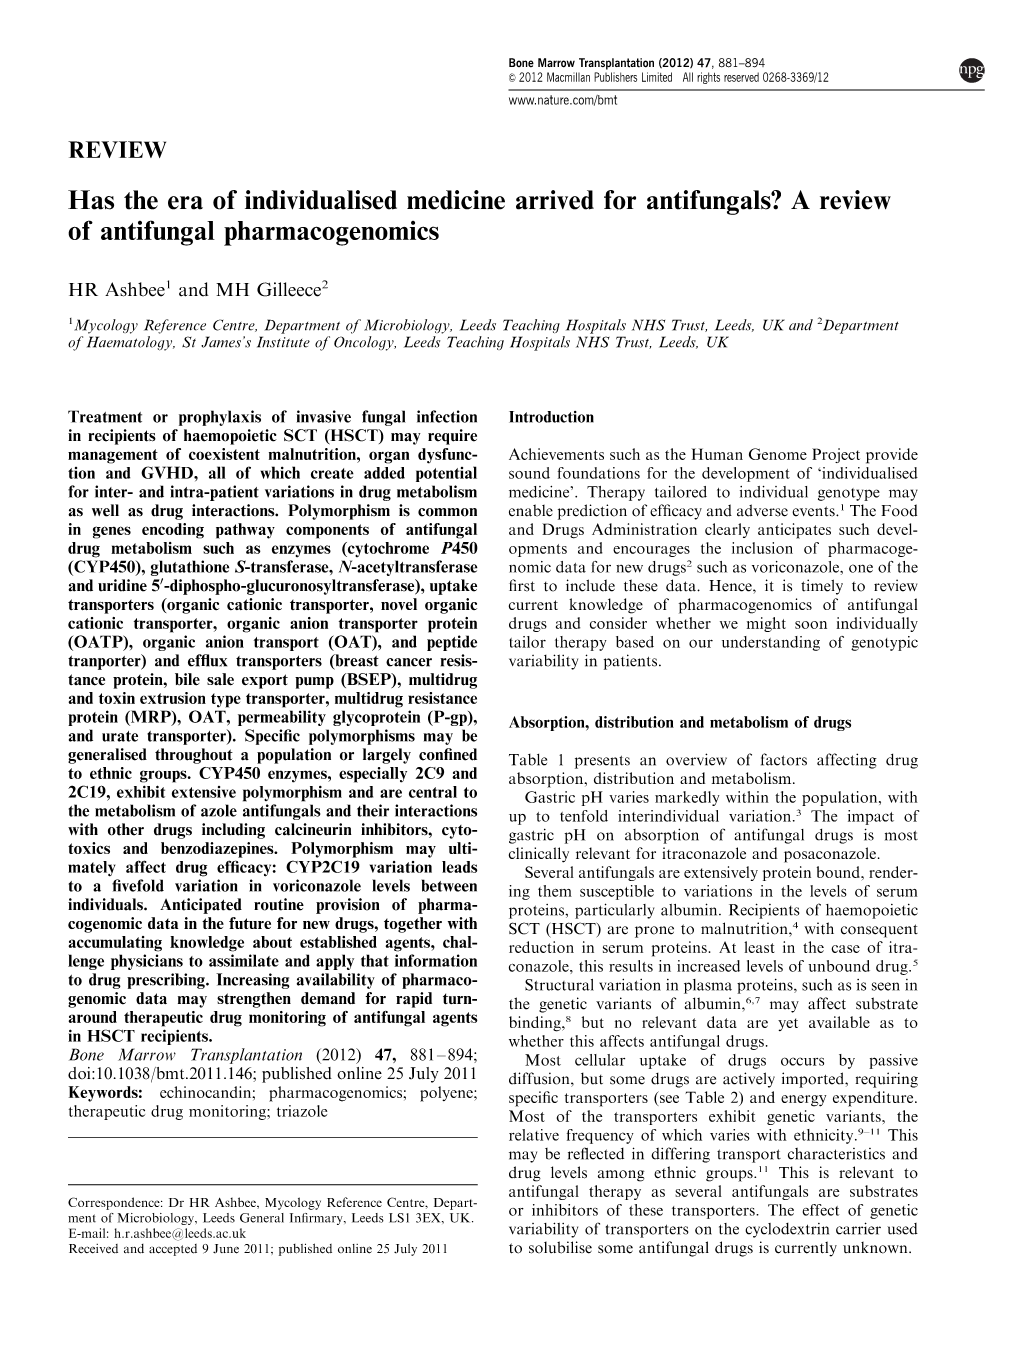 Has the Era of Individualised Medicine Arrived for Antifungals&Quest; a Review of Antifungal Pharmacogenomics